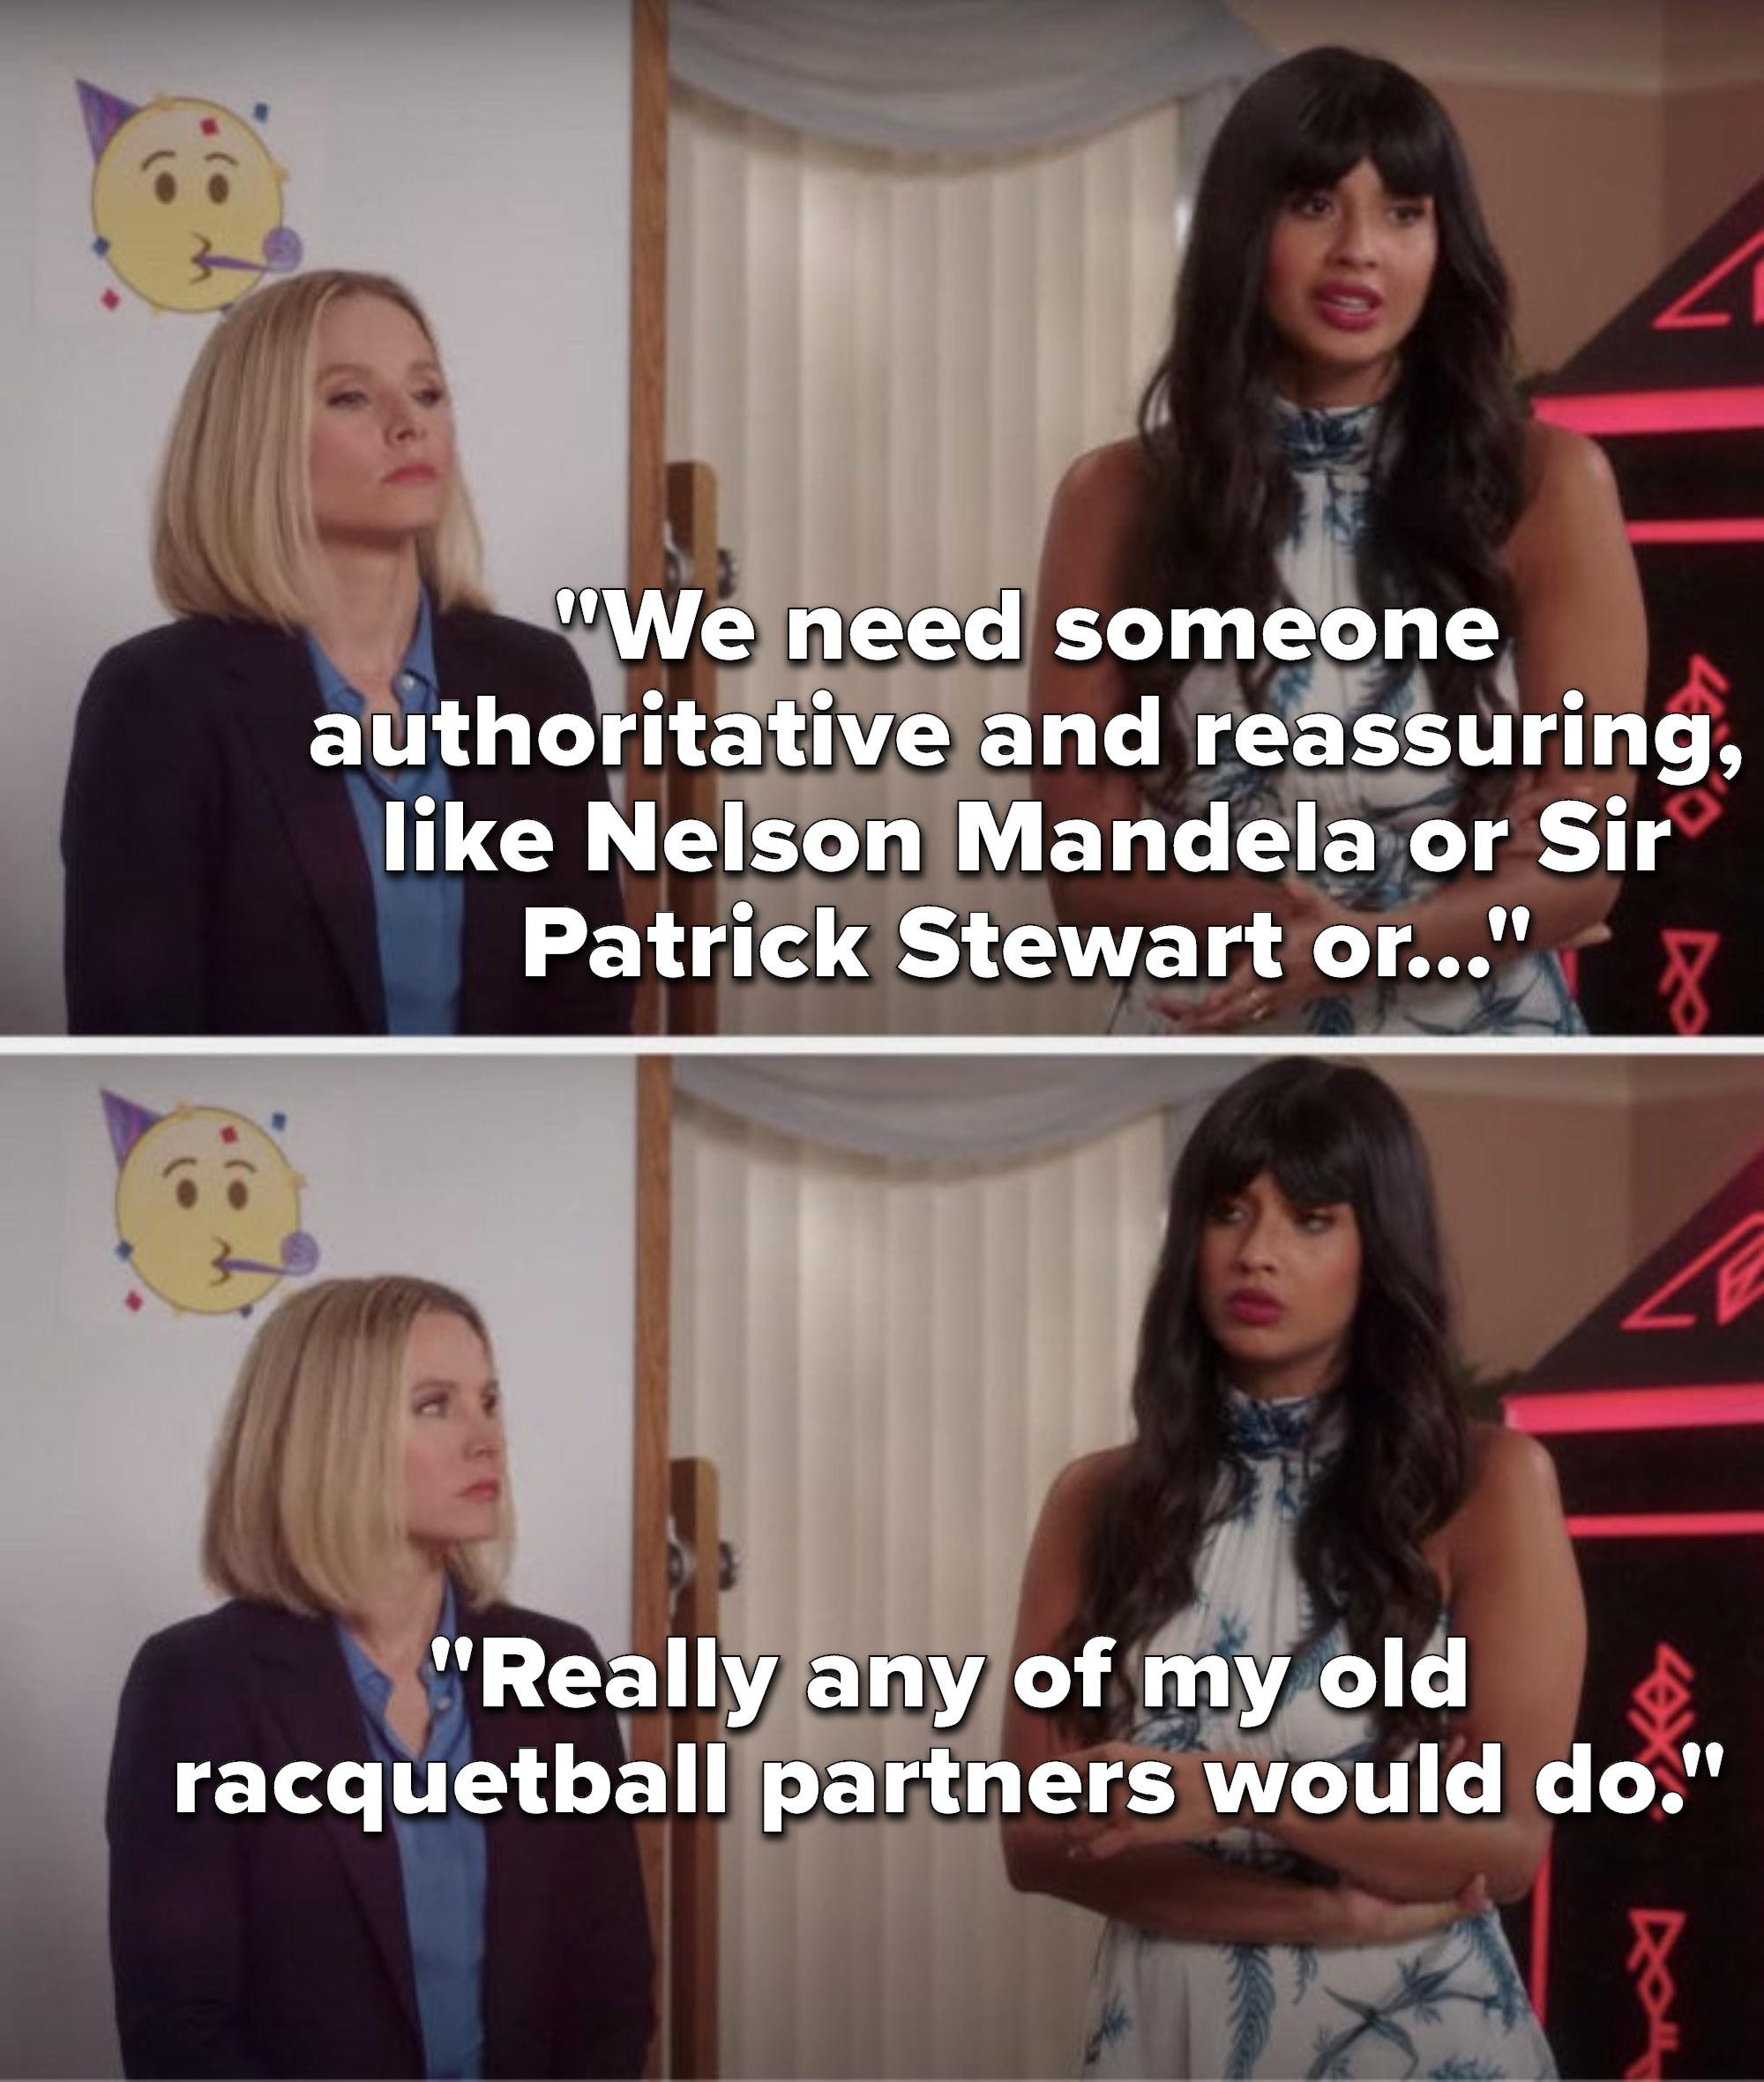 Tahani says, We need someone authoritative and reassuring, like Nelson Mandela or Sir Patrick Stewart or really any of my old racquetball partners would do